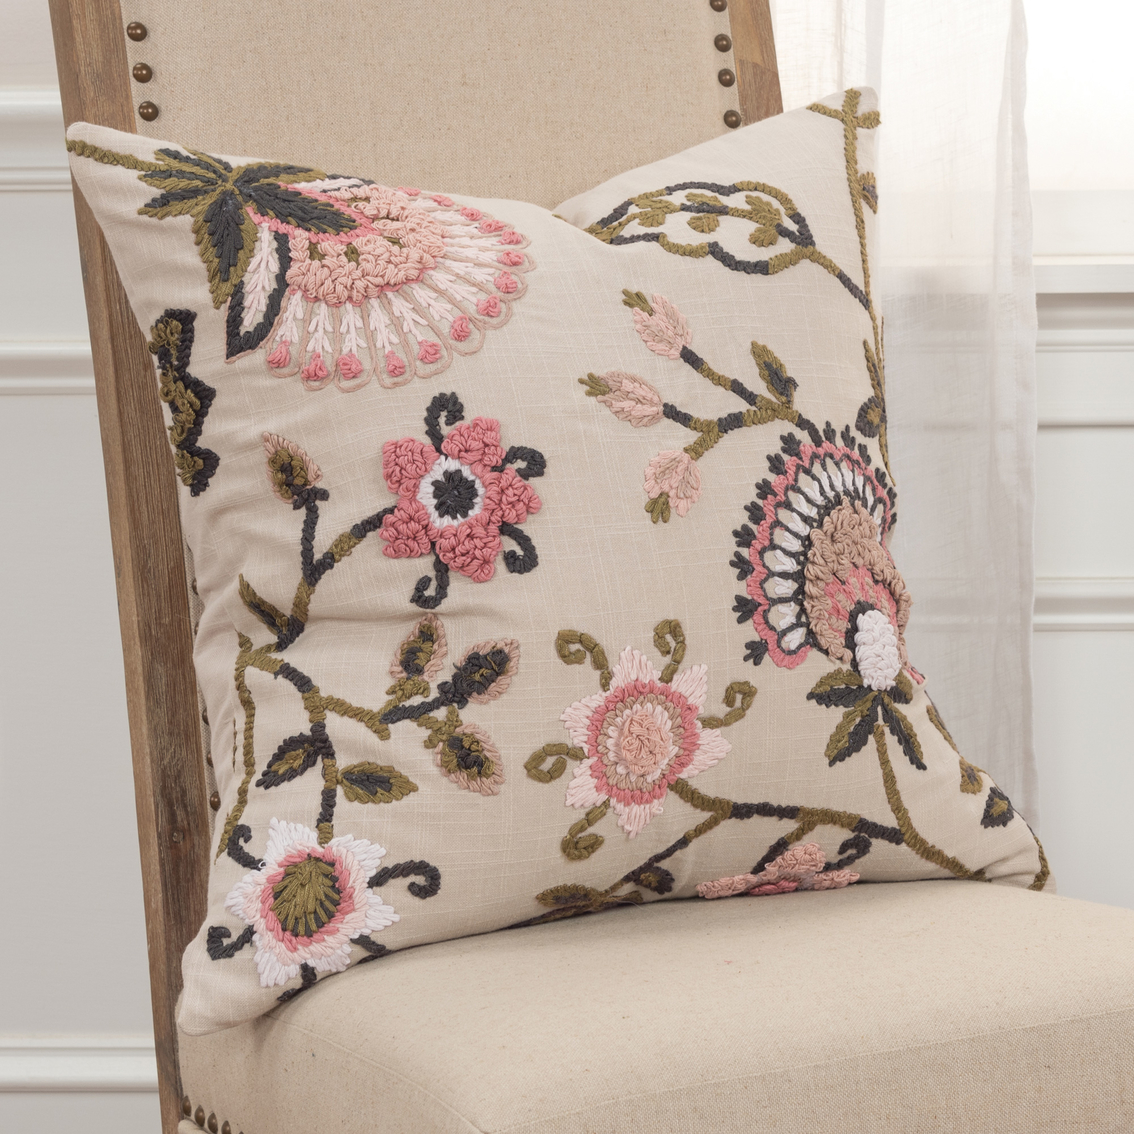 Rizzy Home Floral Blush Square Decorative Throw Pillow - Image 2 of 5